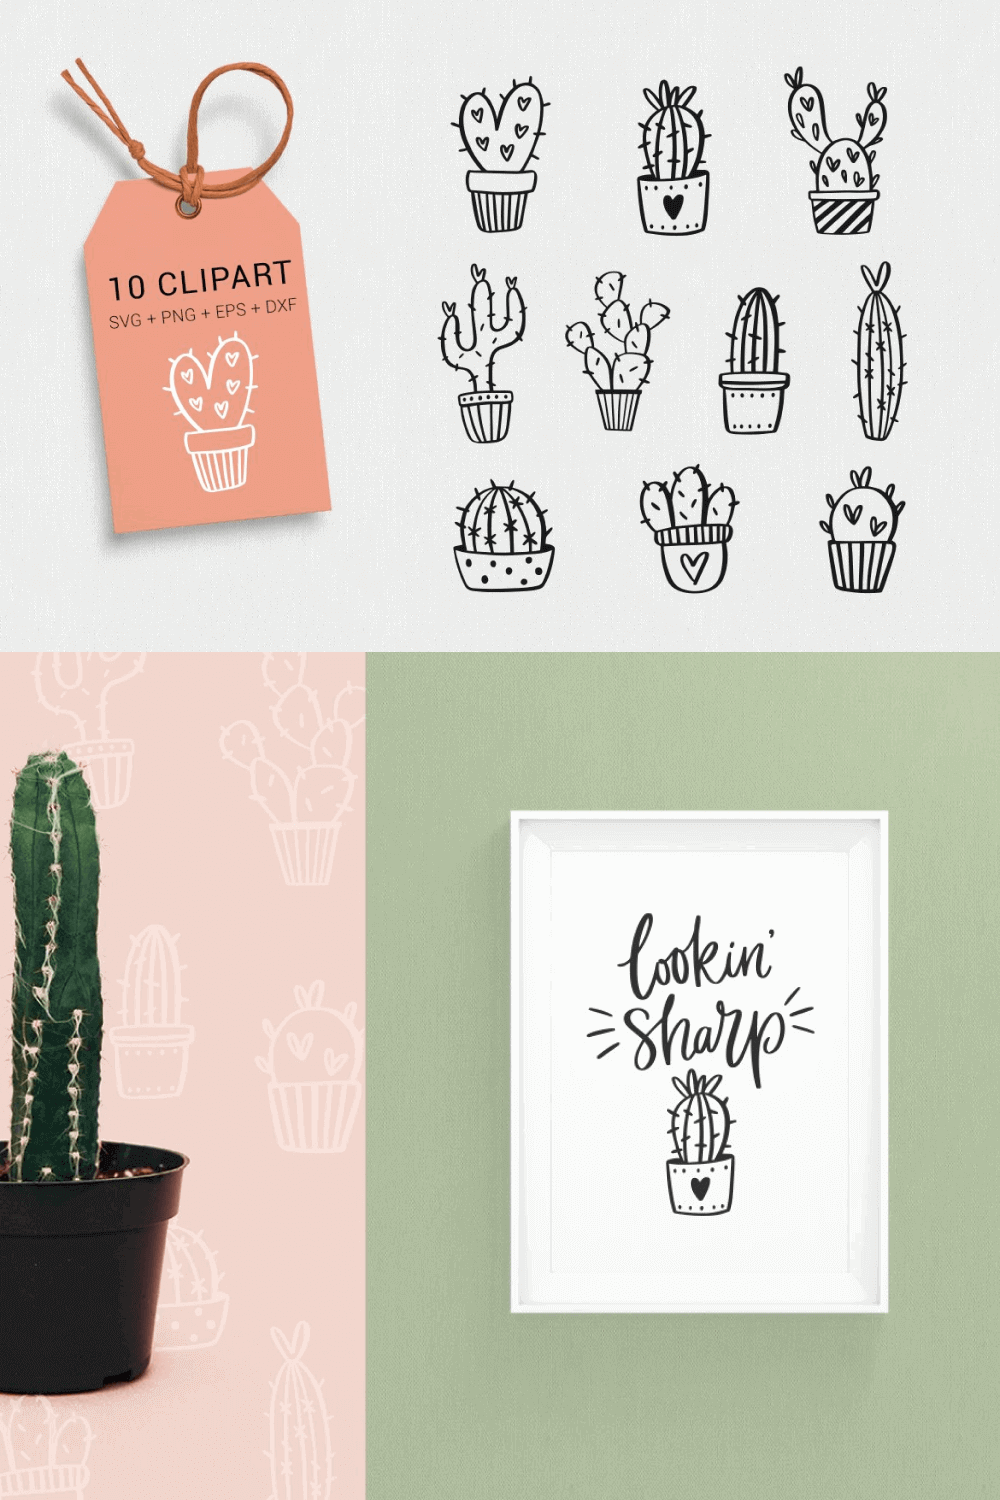 Various 10 Clipart of Cactus.